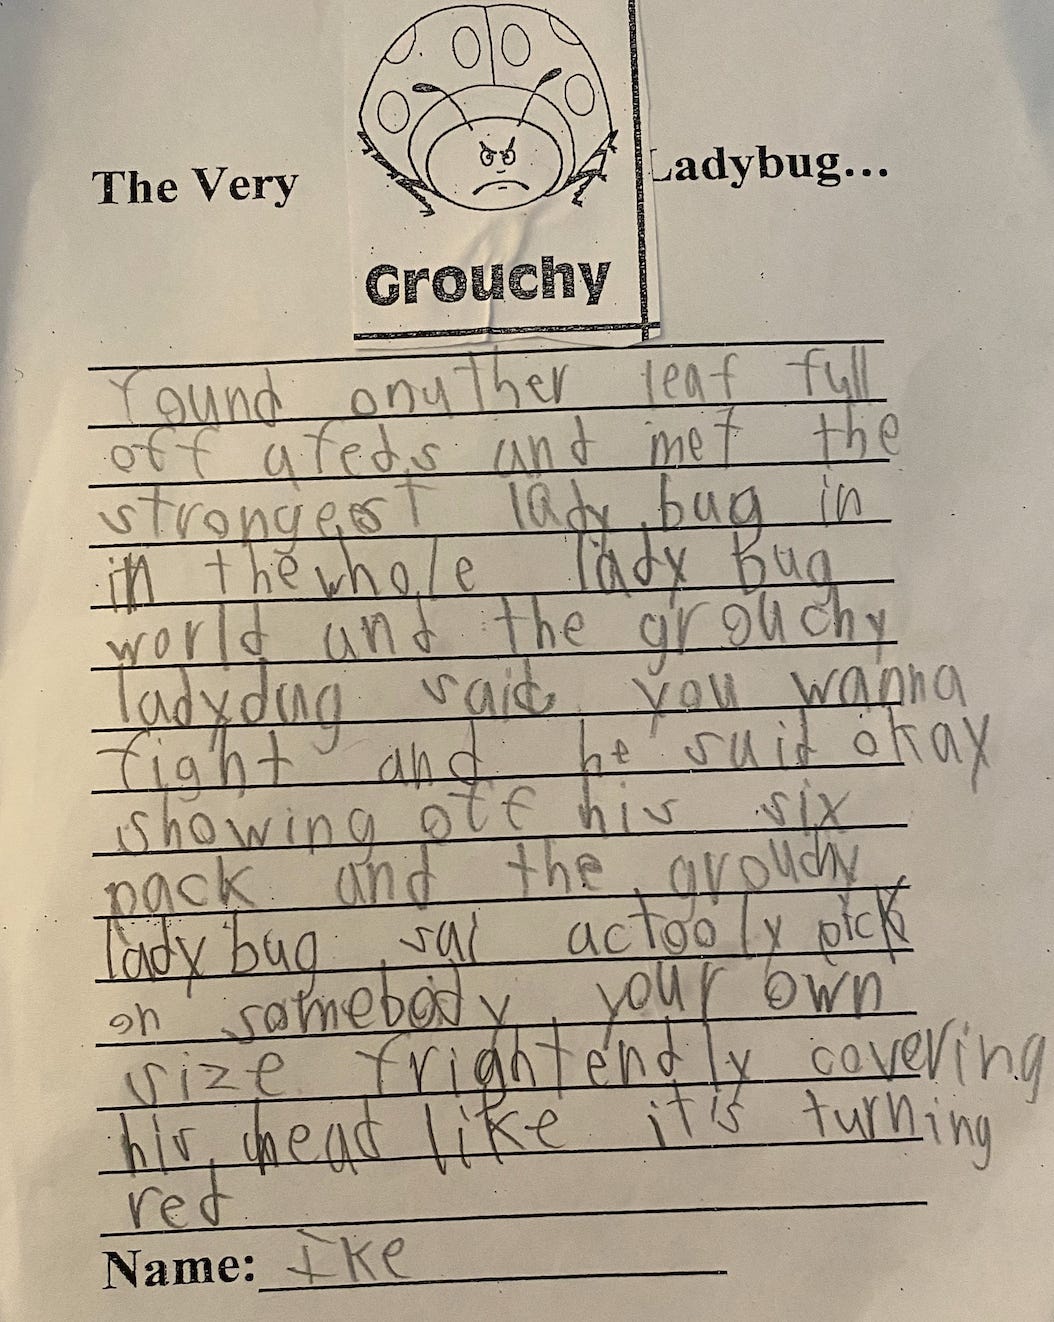 TRANSCRIPTION: The Very Grouchy Ladybug … found another leaf full off (sic) afeds (sic) and met the strongest ladybug in the whole ladybug world[.]   [A]nd the grouchy ladybug said ‘you wanna fight[?”] and he said “okay,” showing off his six-pack, and the grouchy ladybug said “actooly (sic) pick on somebody your own size[,”] frightenedly covering his head like it is turning red.